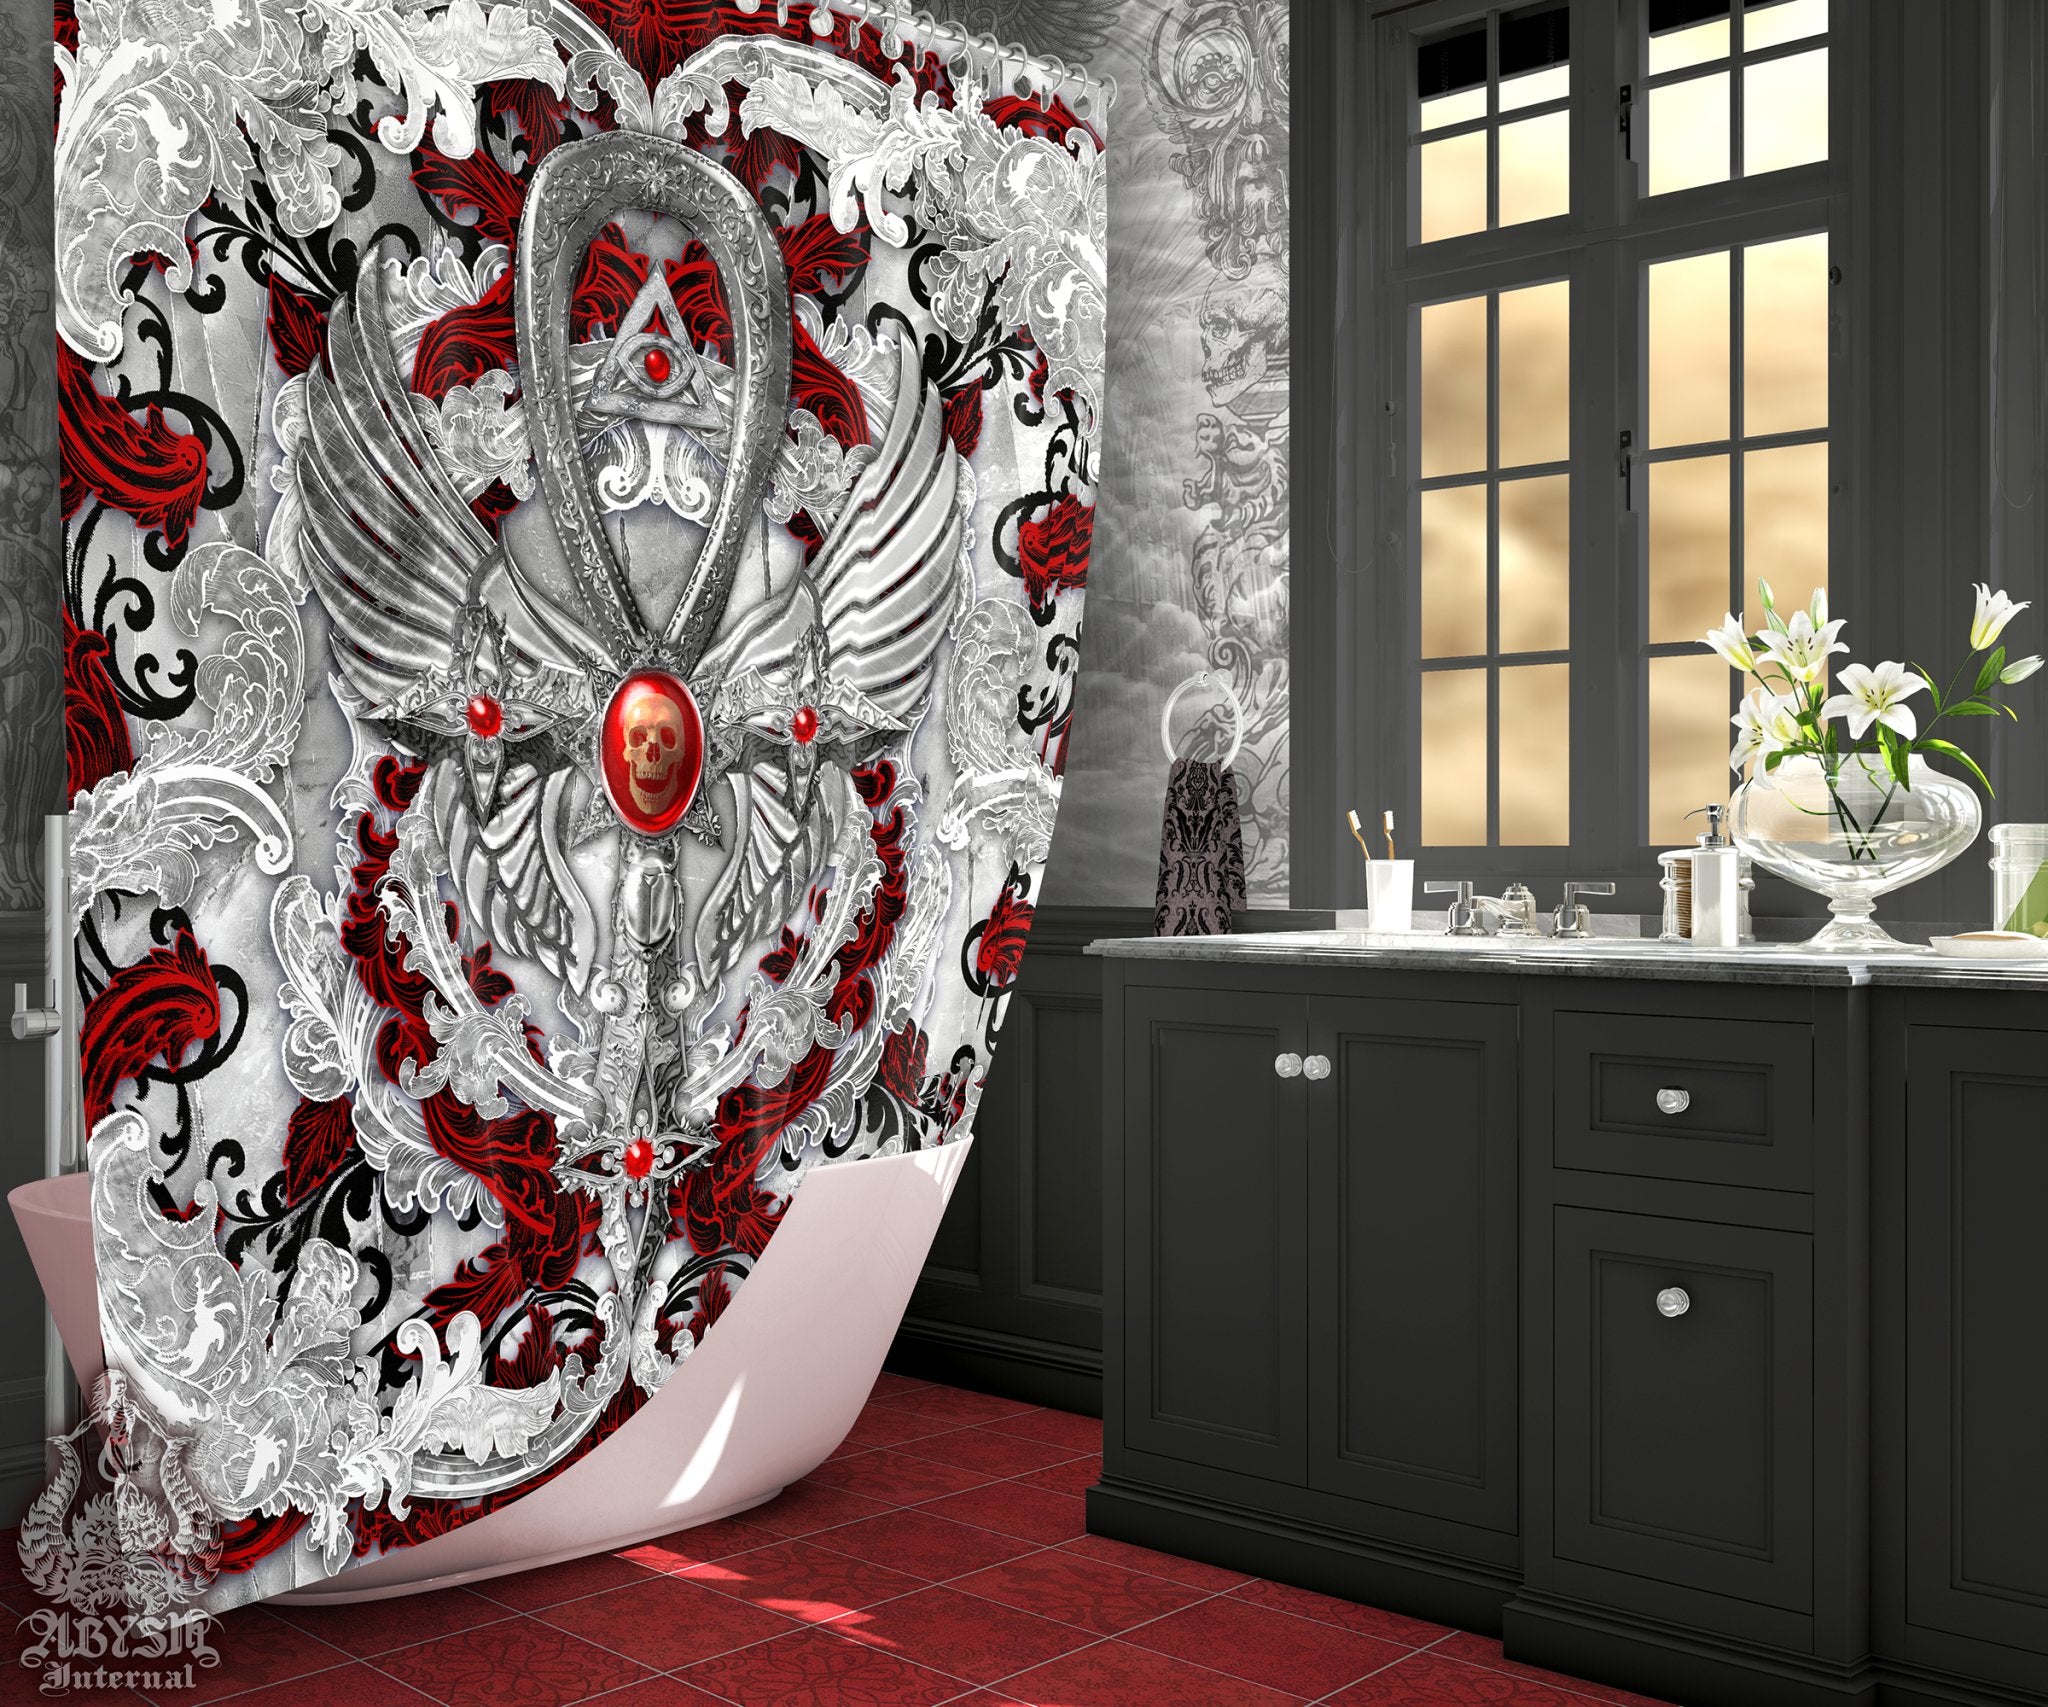 Bloody White Goth Ankh Shower Curtain, 71x74 inches, Gothic Bathroom Decor, Occult - Ornamented, Red, Black, 3 Colors - Abysm Internal